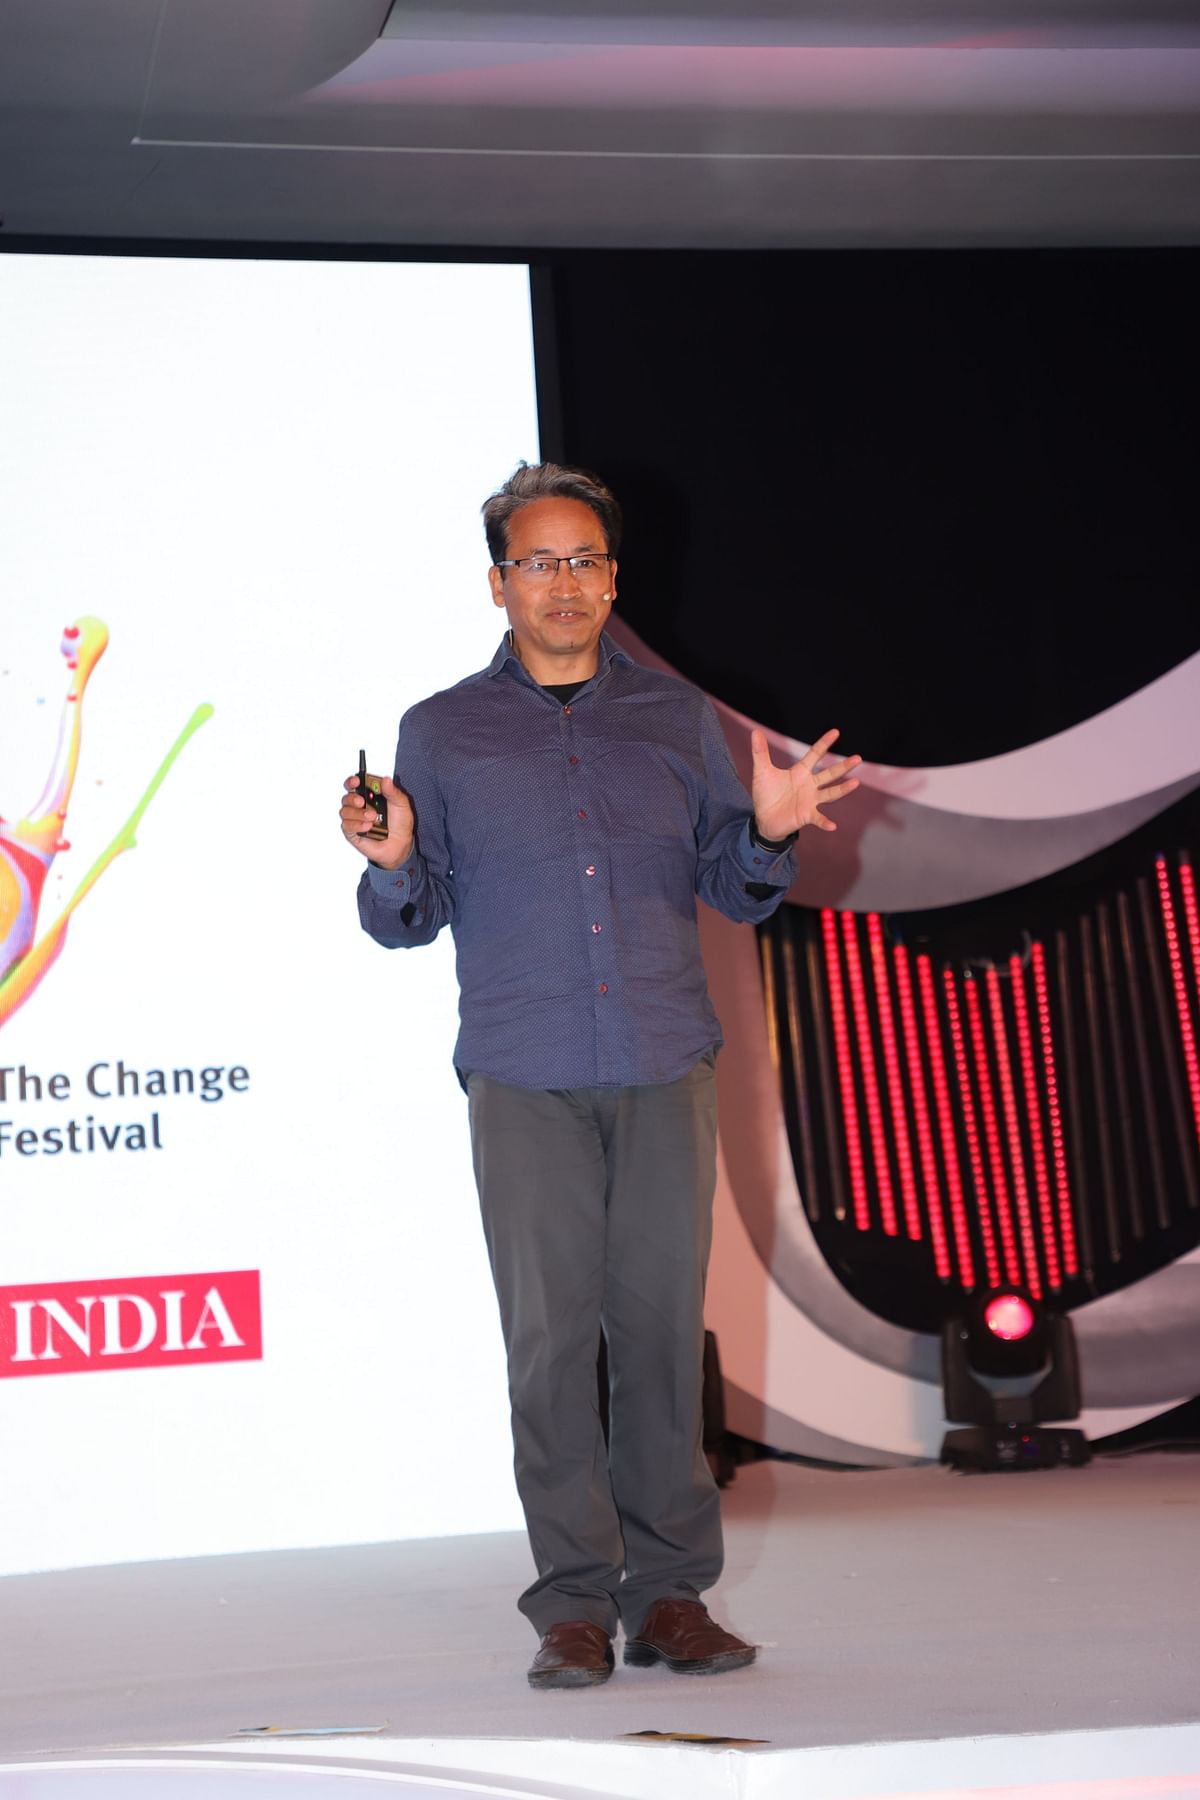 “Simplicity is the best way to live”: Sonam Wangchuk